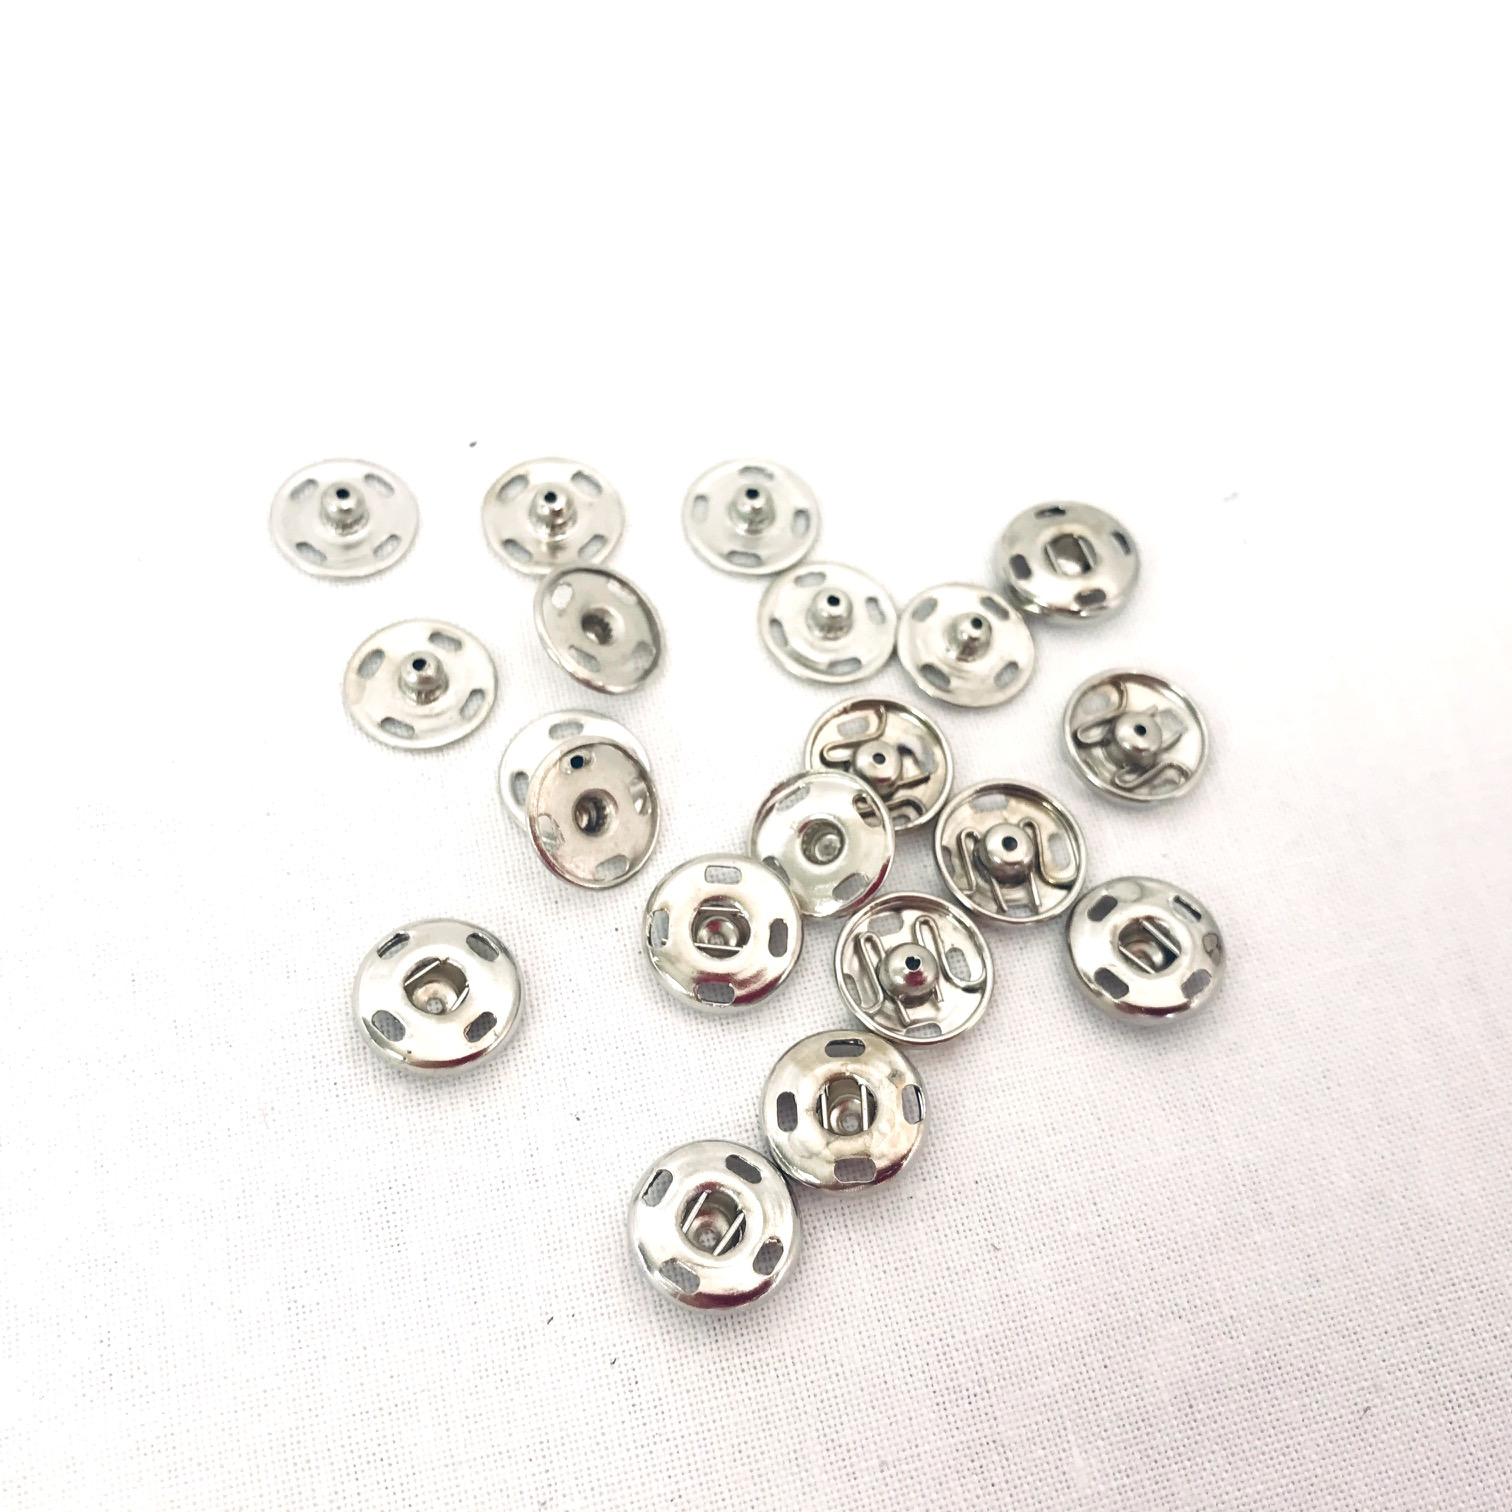 Boutons pression 11mm pour couture mercerie